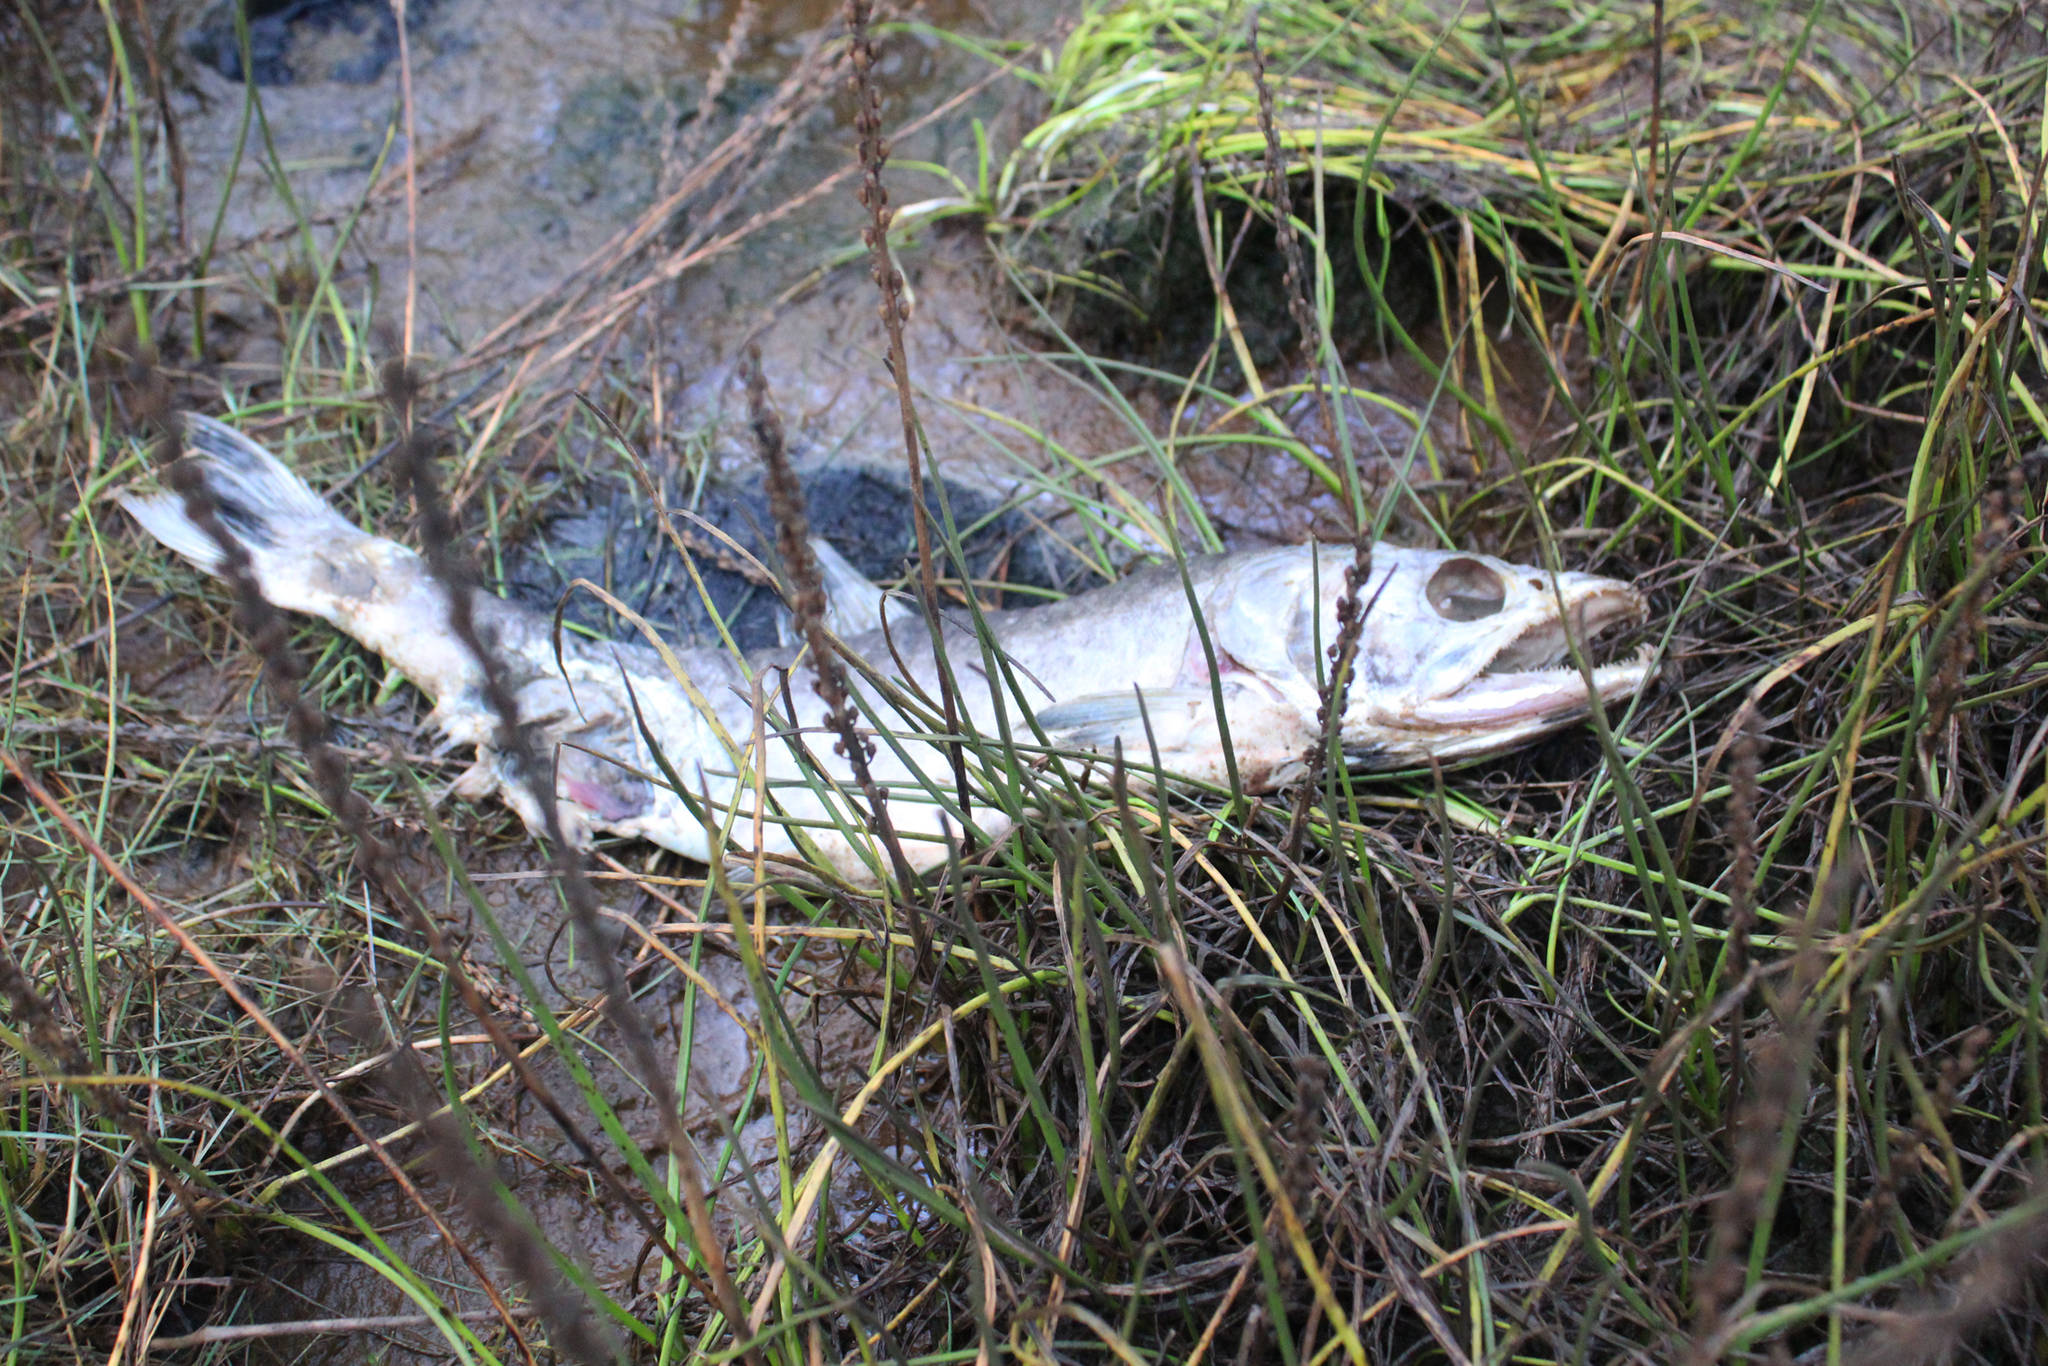 A dead fish decomposes in the Beluga Slough on Thursday, Sept. 28, 2017 in Homer, Alaska. A group of Paul Banks Elementary students got schooled in the ways of the slough and Beluga Lake during a field trip there last week. (Photo by Megan Pacer/Homer News)